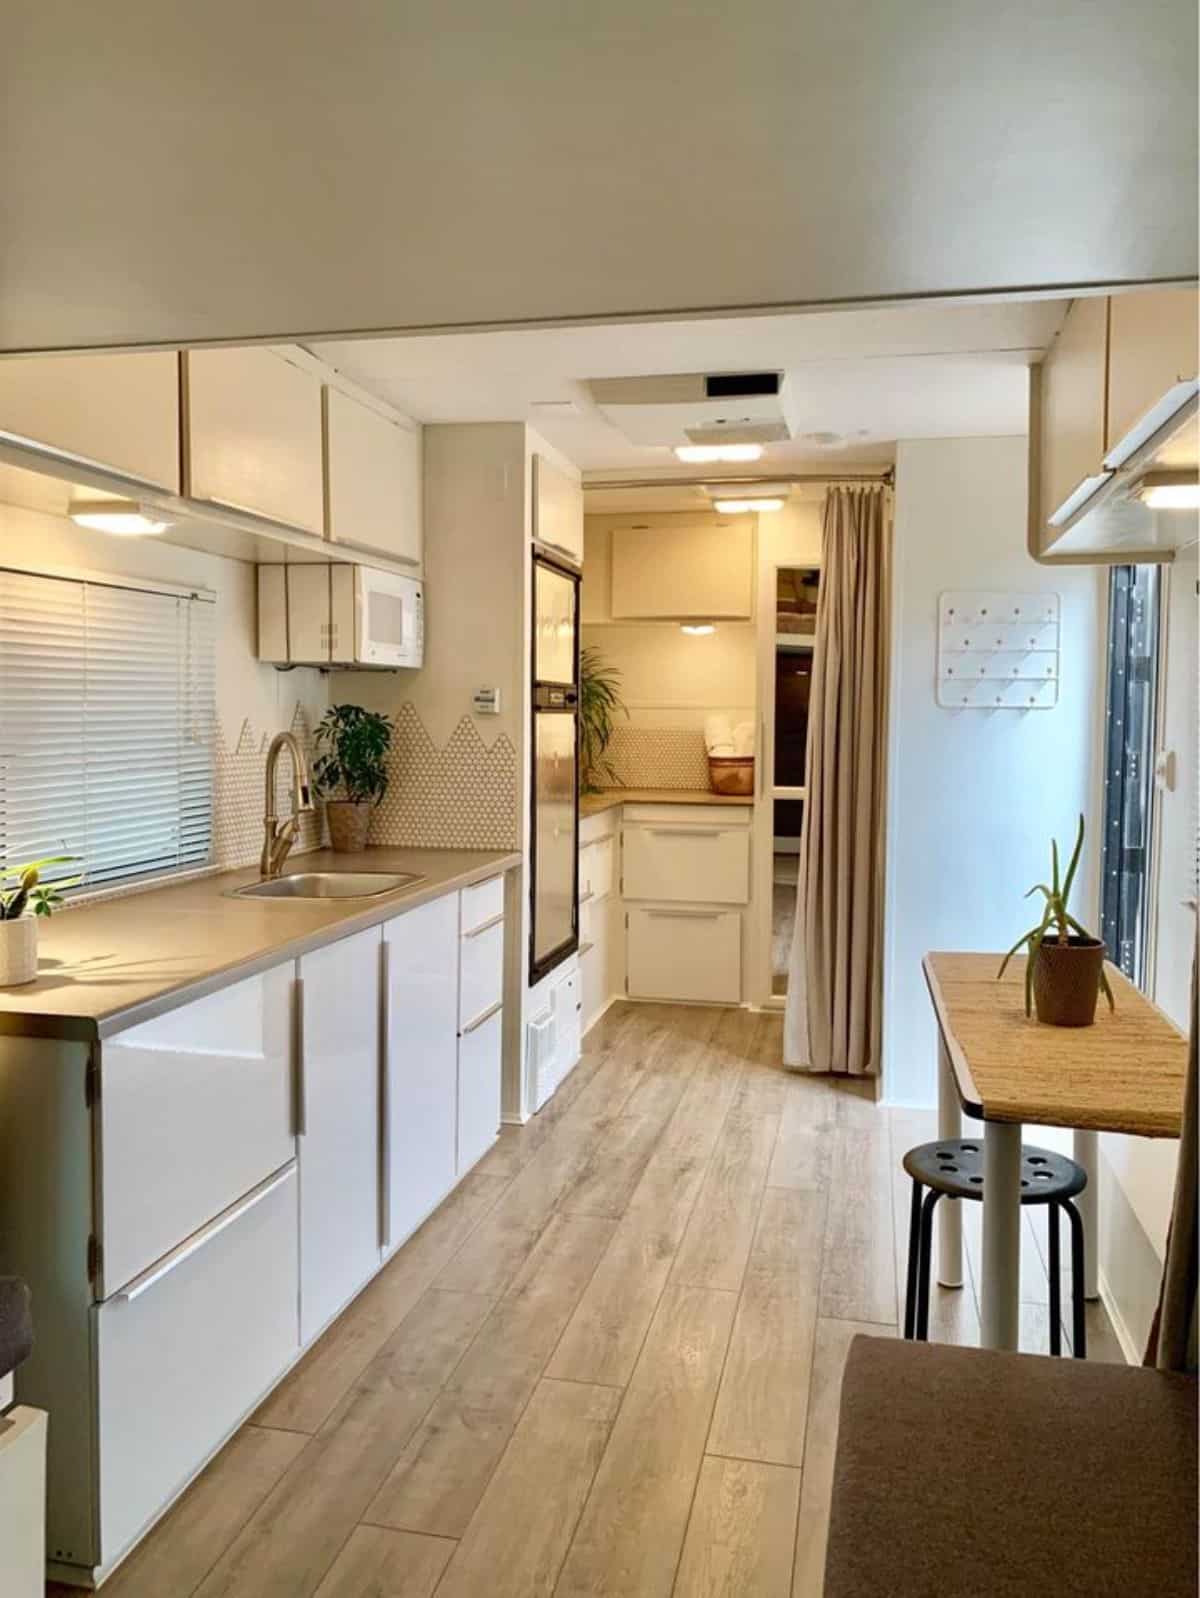 Beautifully designed kitchen area of 20' Compact Tiny House